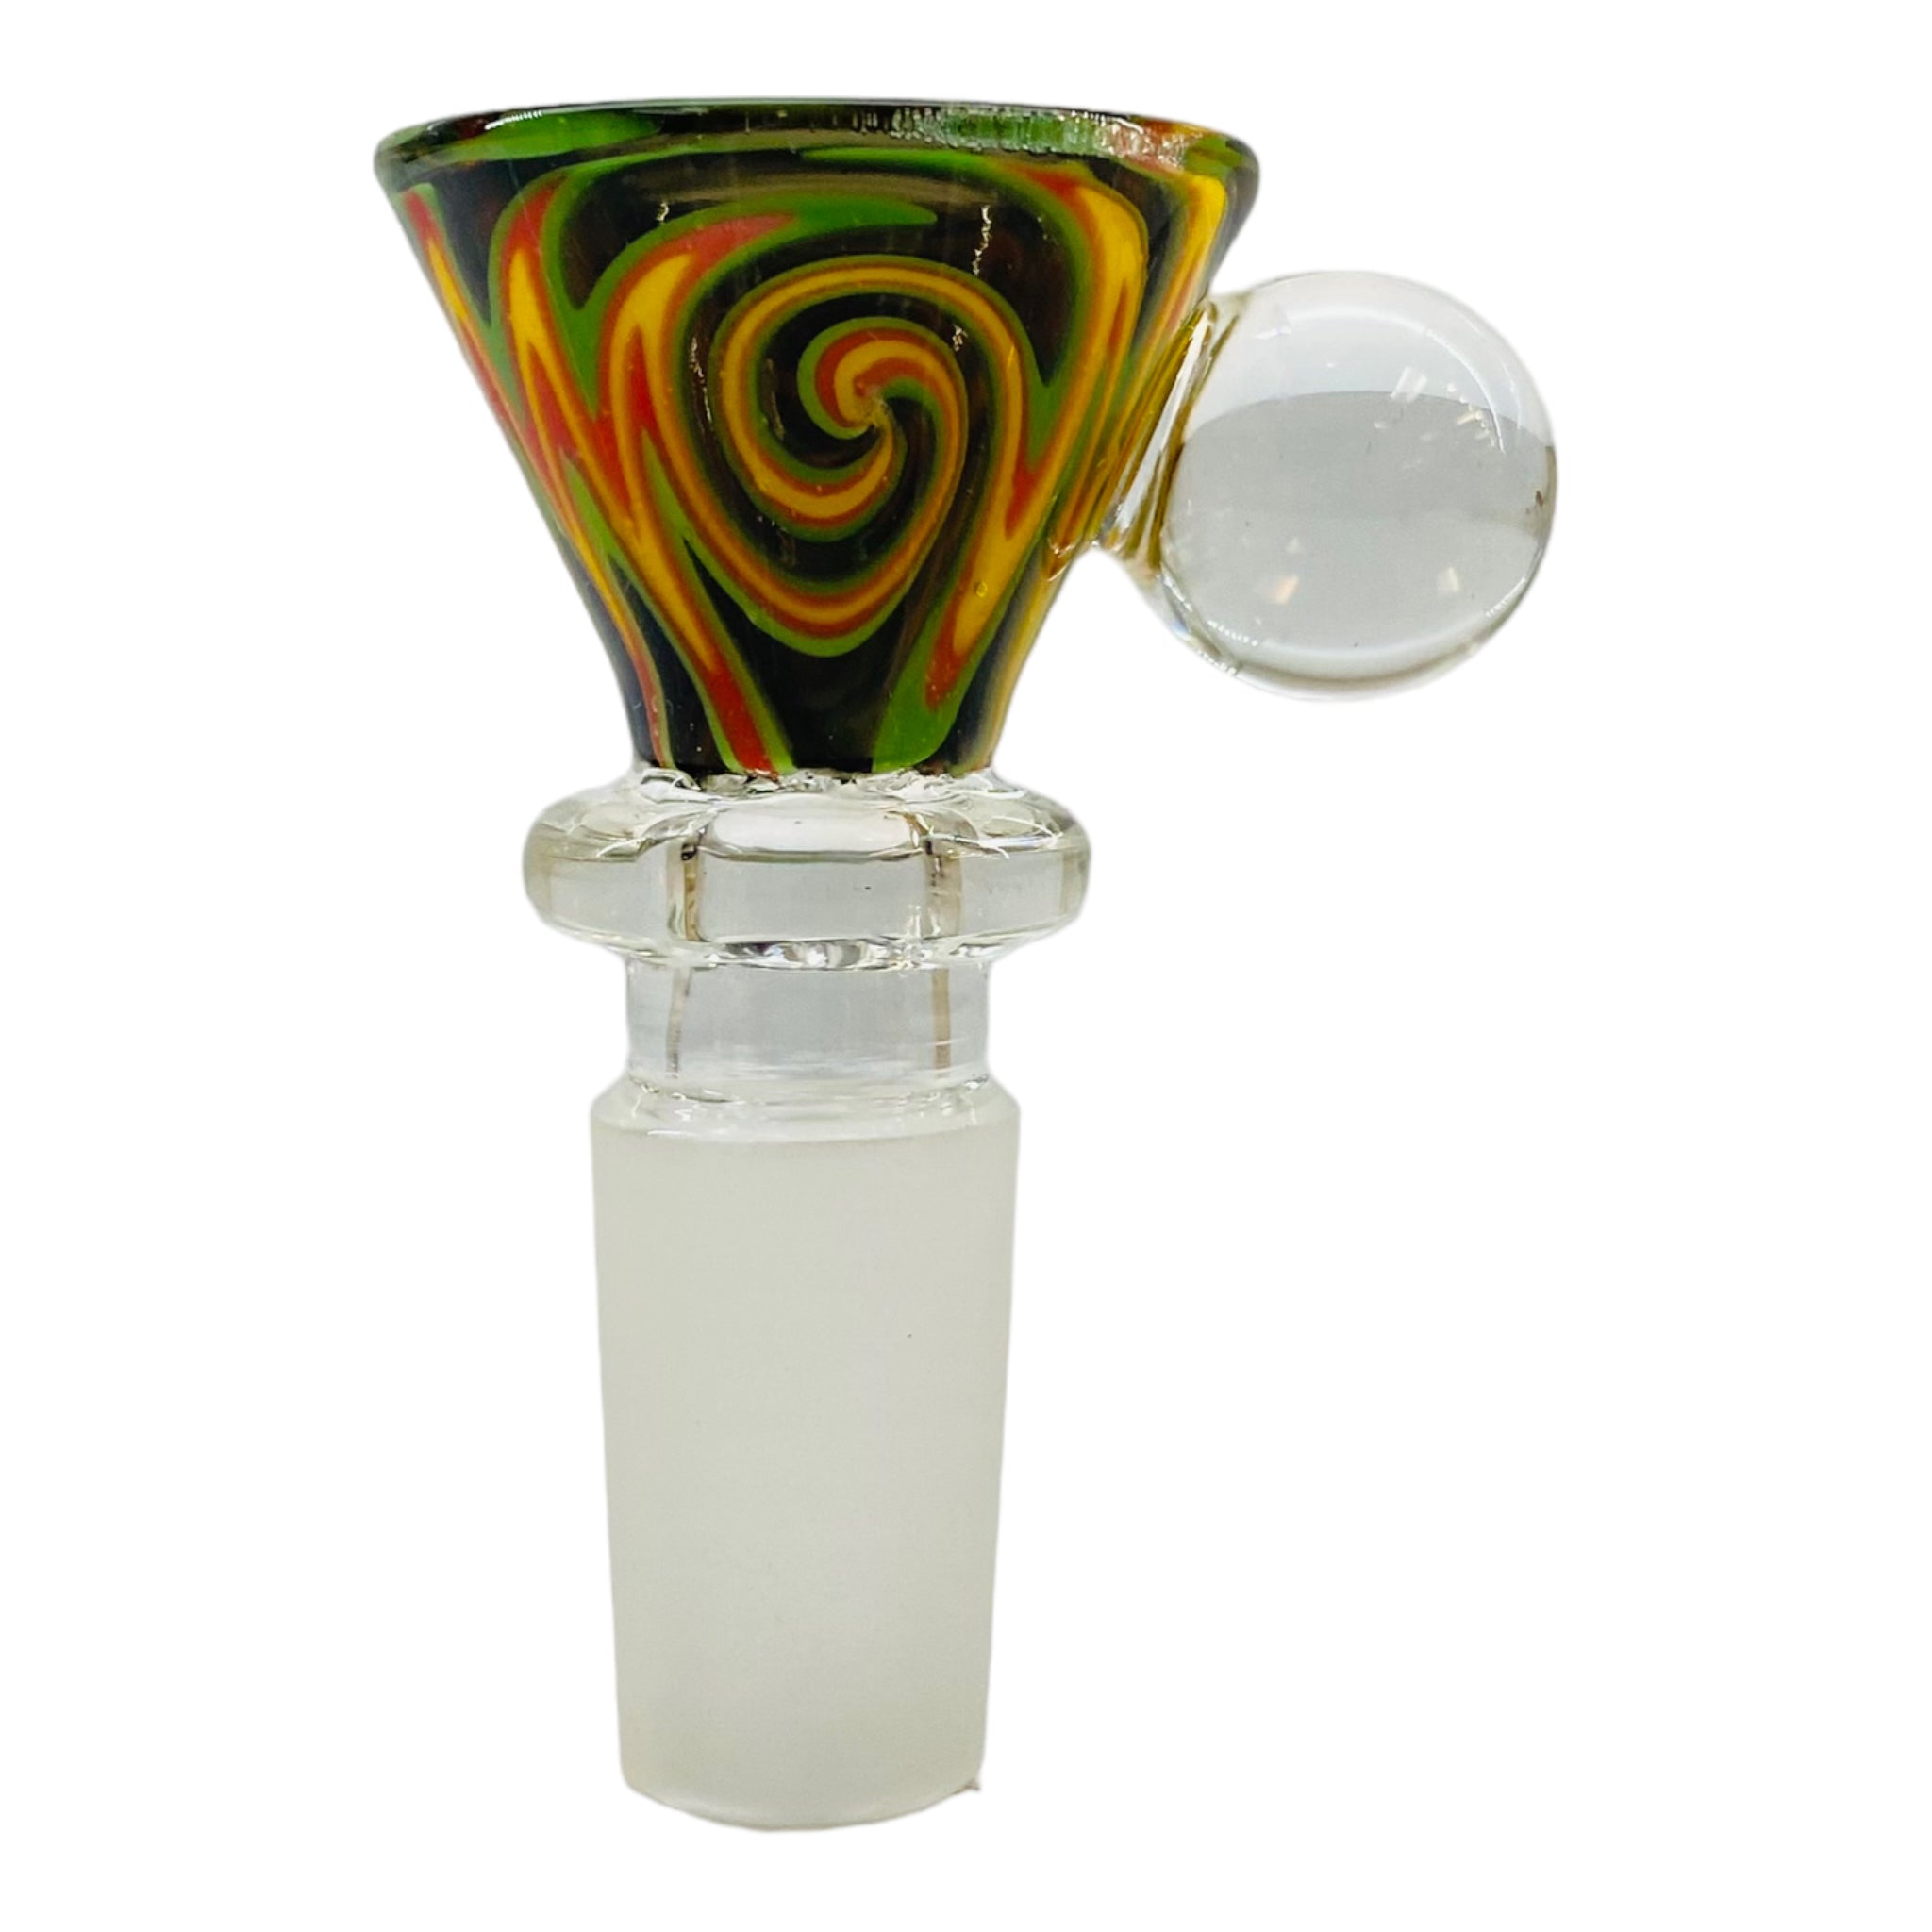 14mm Flower Bowl - Wig Wag Martini Bowl With Built In Honeycomb Screen - Rasta